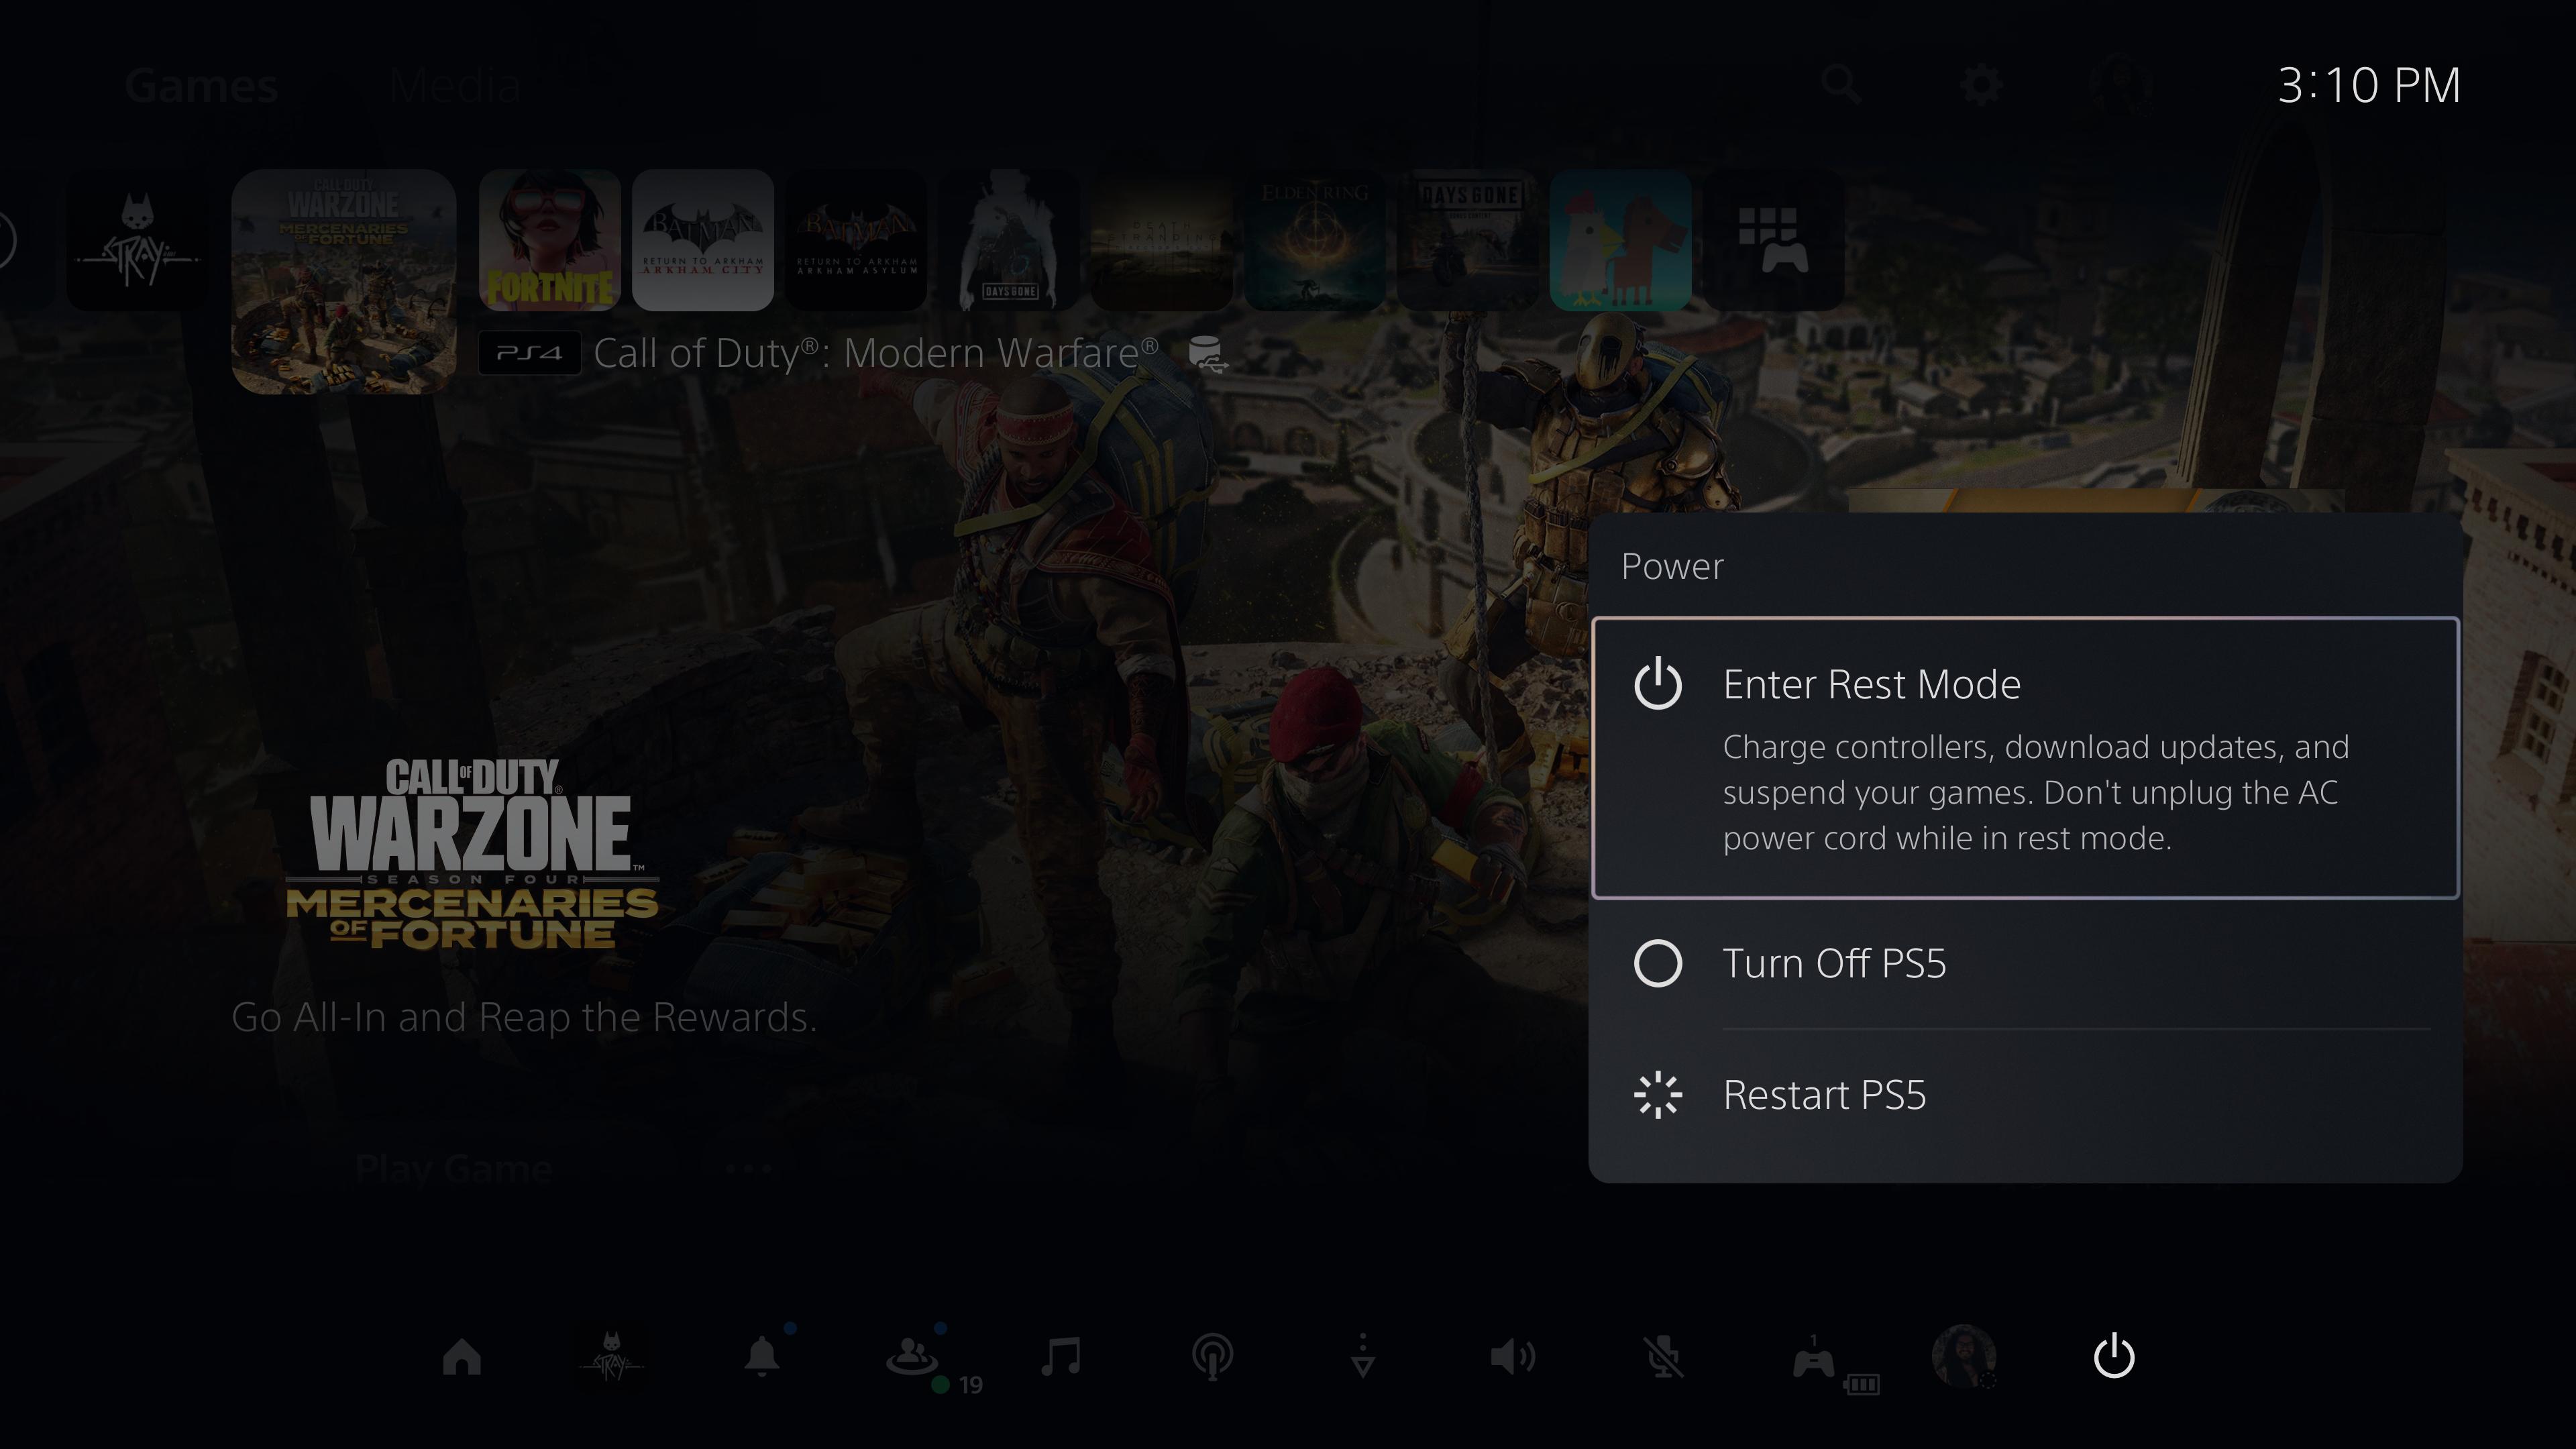 Menu allowing you to place PS5 into Rest Mode.